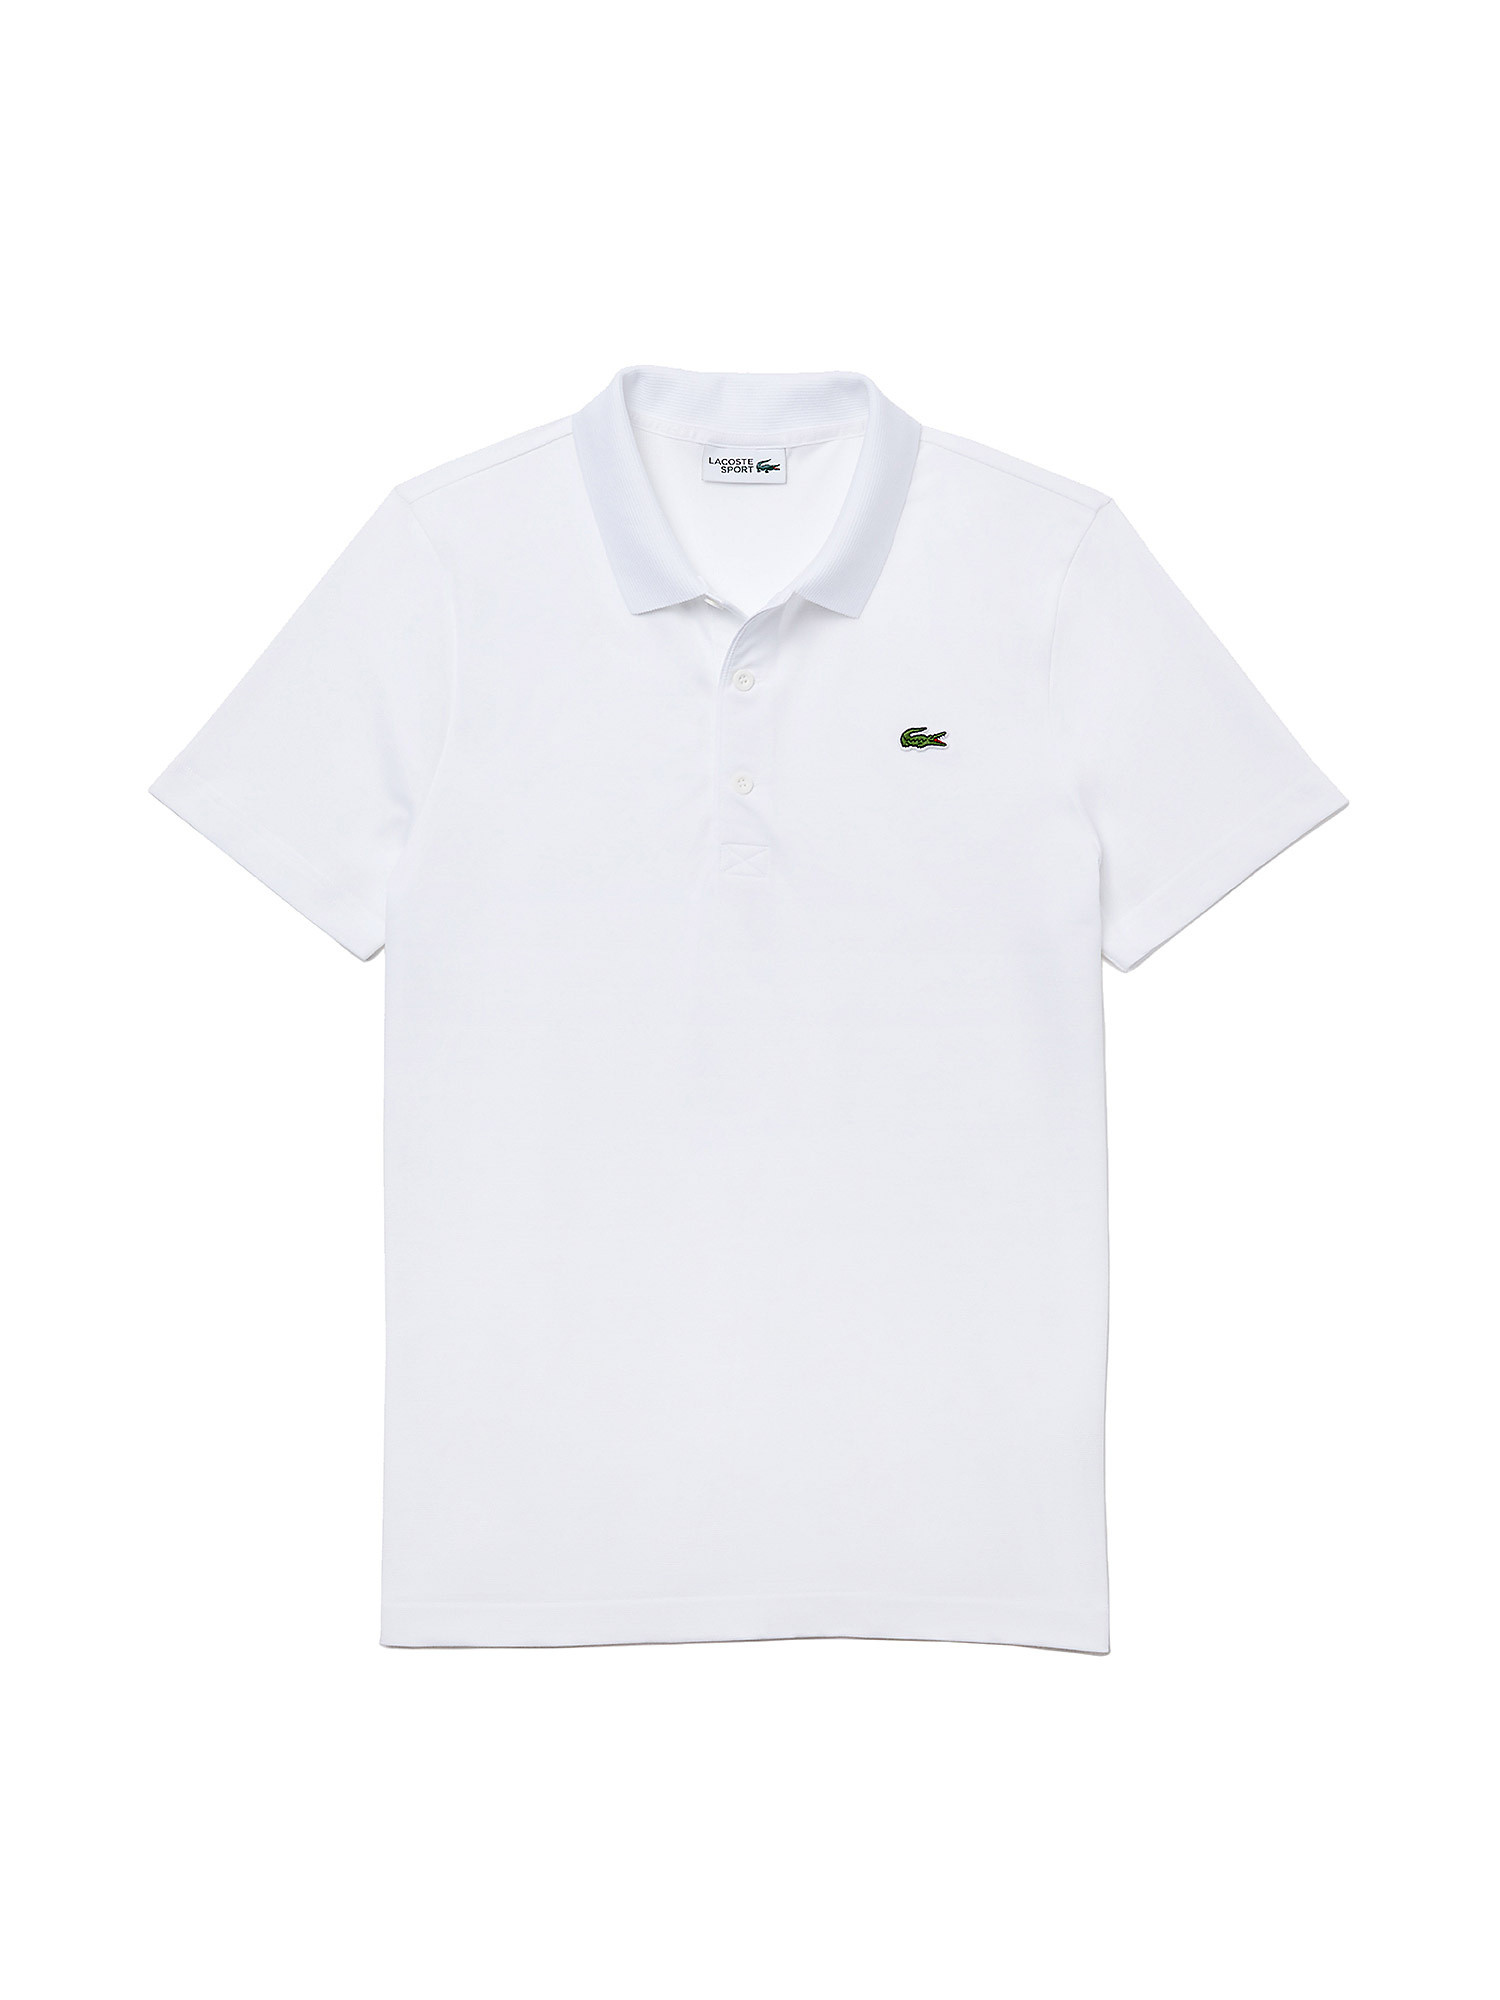 Men's Lacoste Cotton Polo Shirt, White, large image number 0